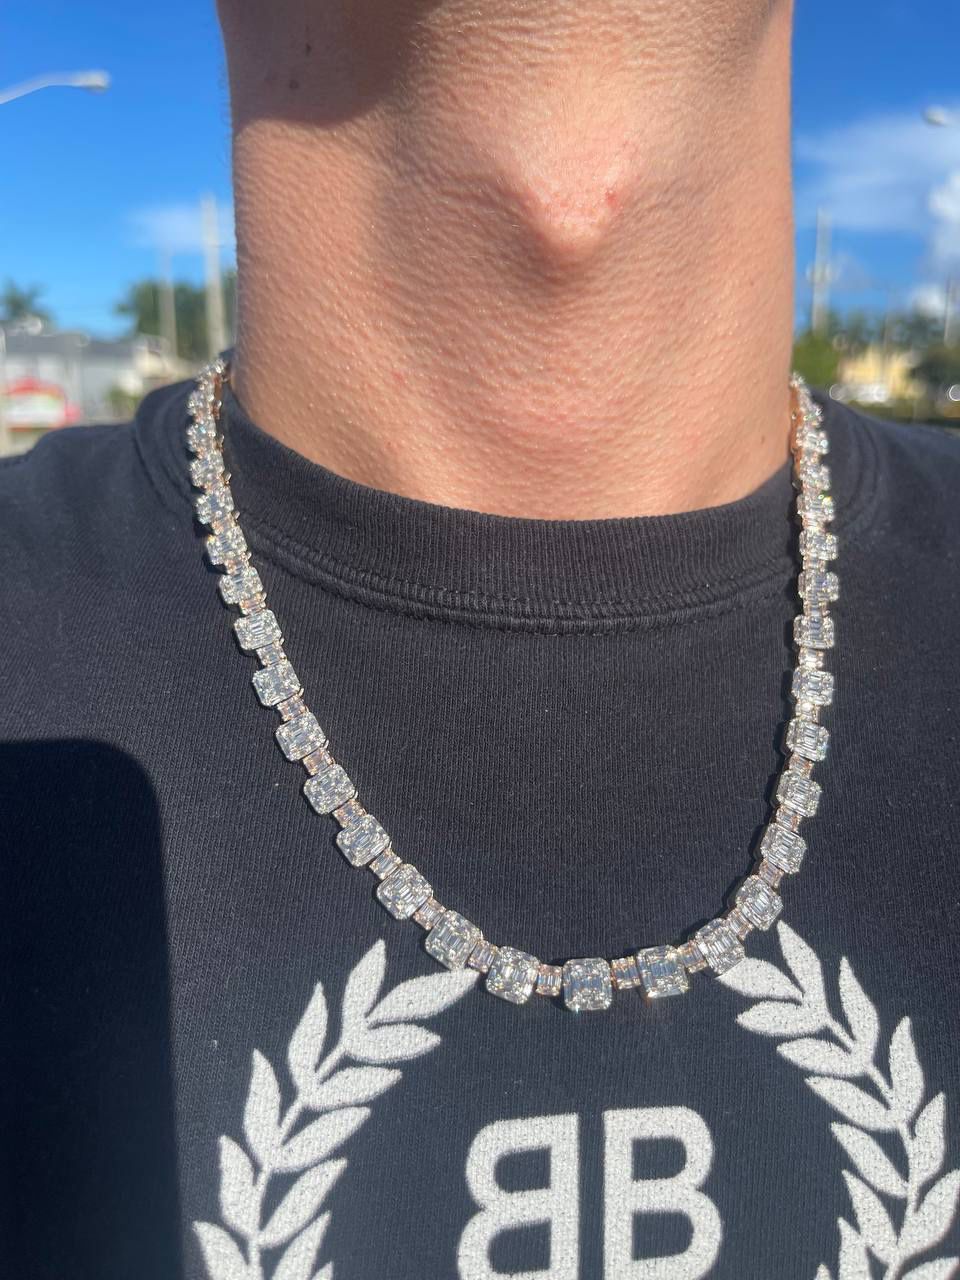 14k solid white and rose gold Bussdown diamond vvs baguette and round natural stones two tone necklace chain iced out